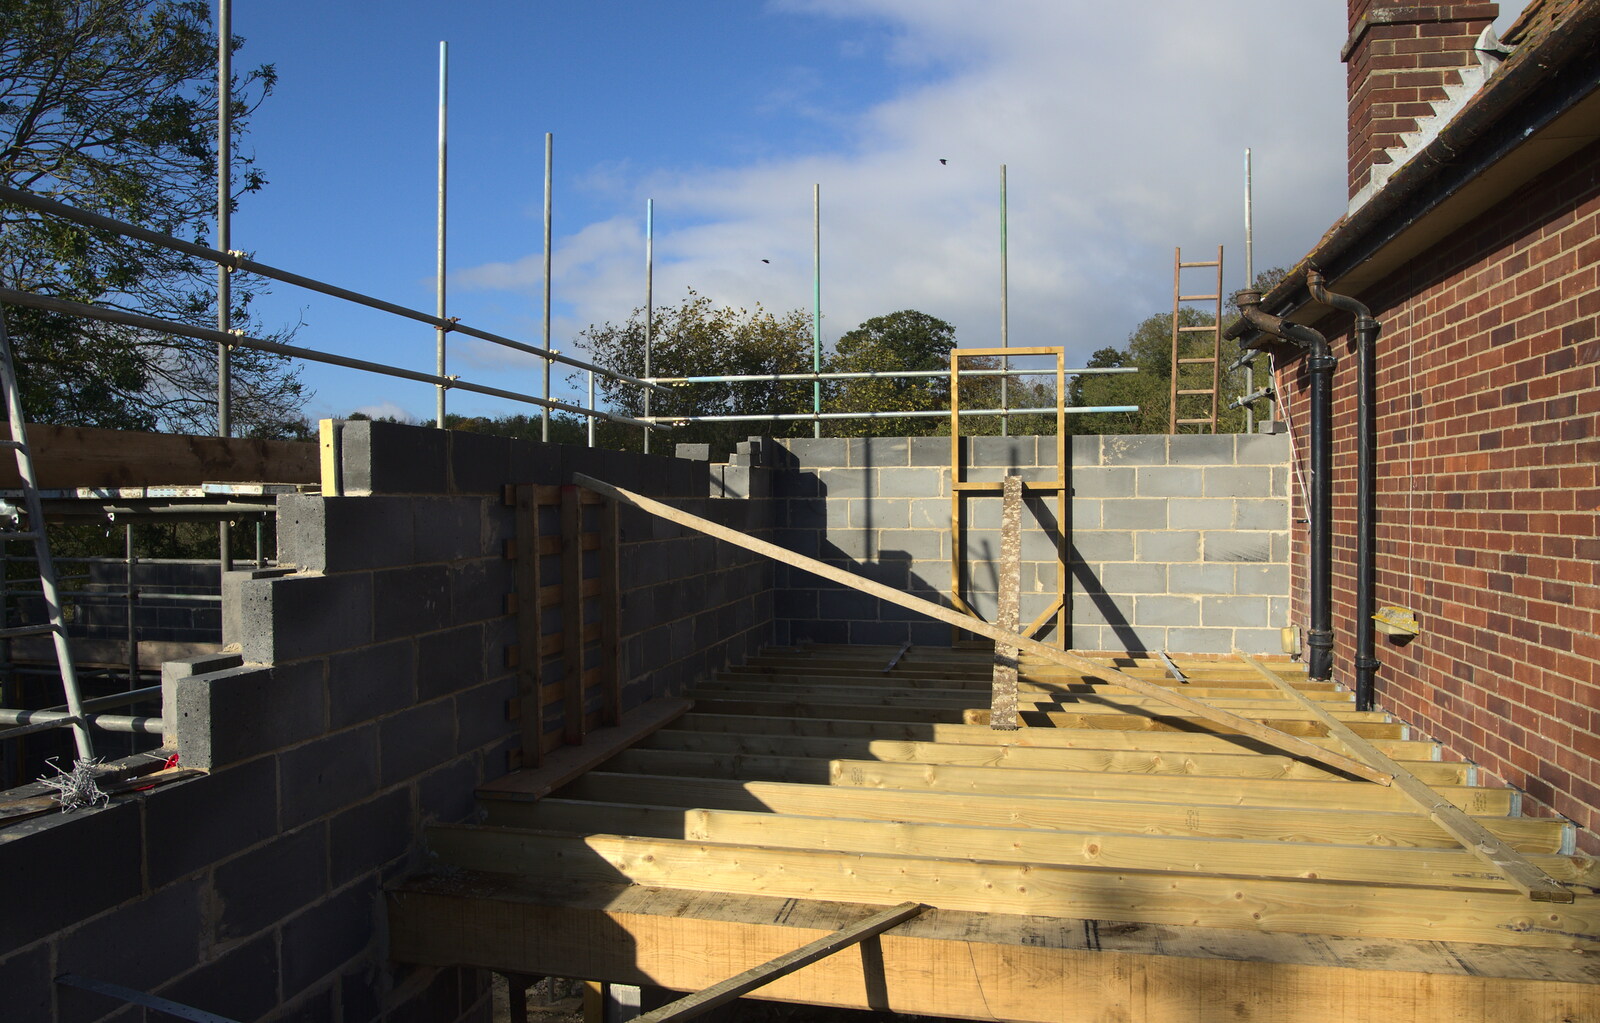 A November Miscellany and Building Progress, Thornham and Brome, Suffolk - 17th November 2013: The first floor of the side extension